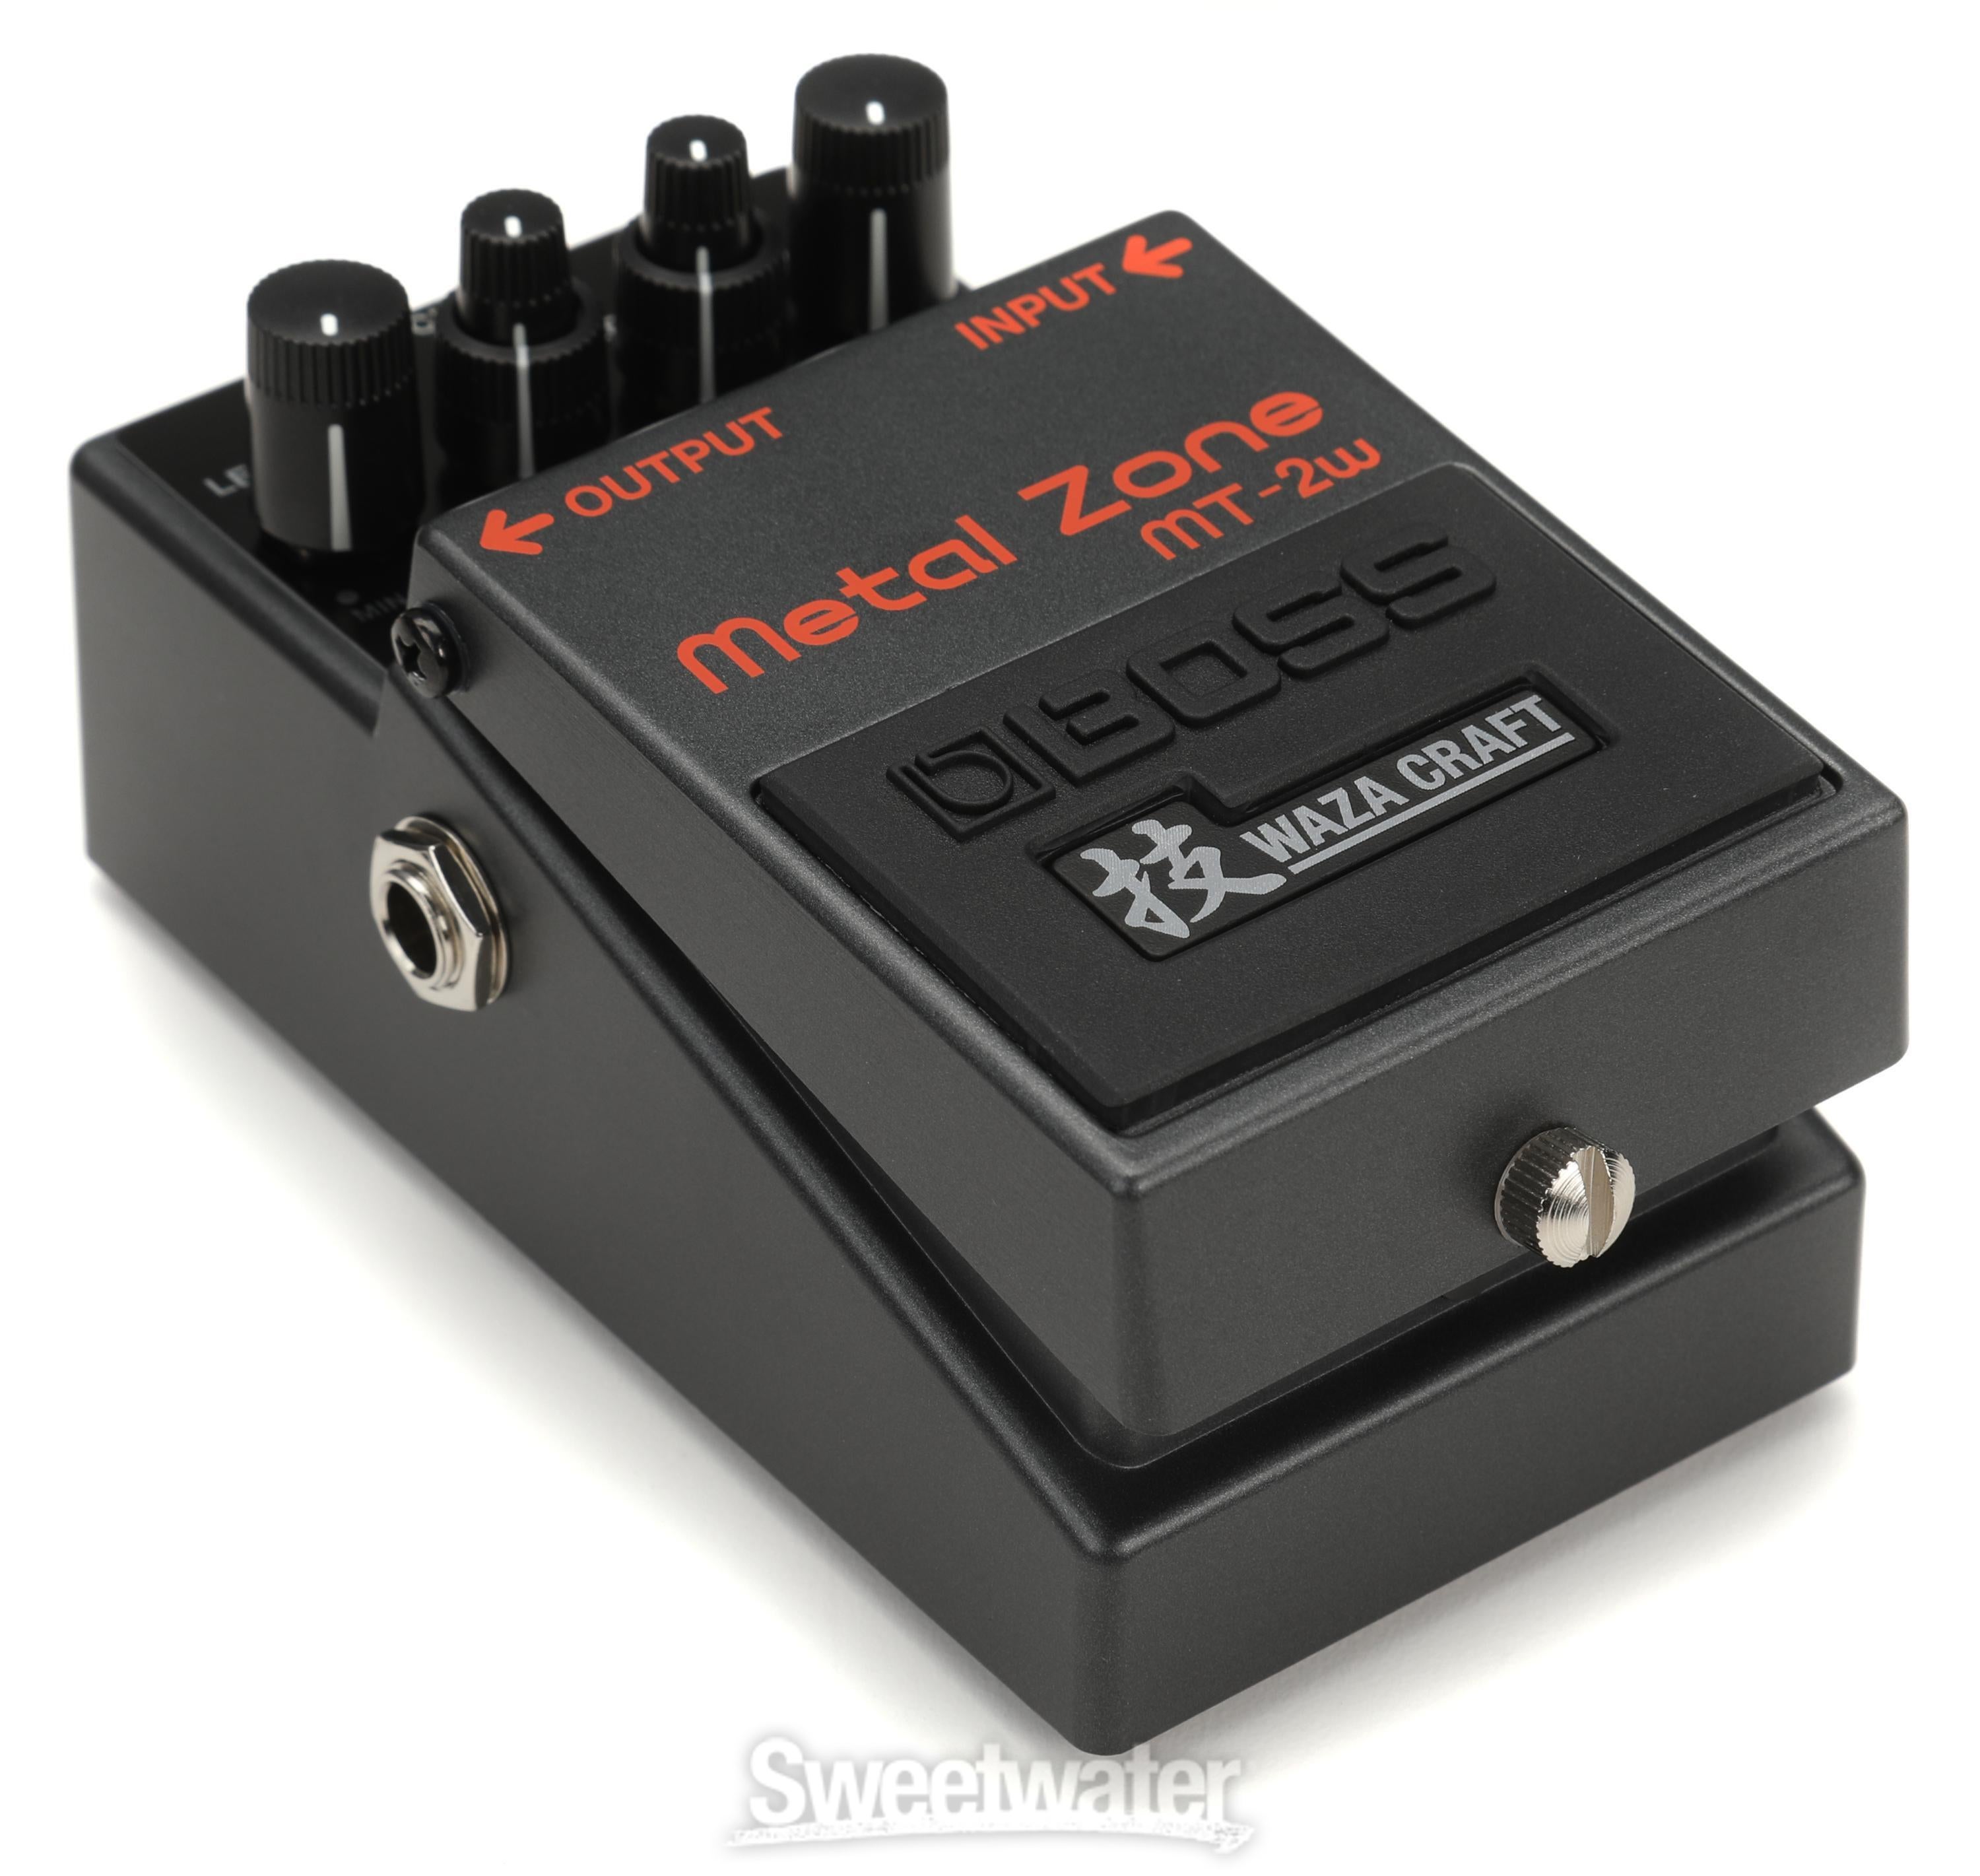 Boss MT-2W Waza Craft Metal Zone Distortion Pedal Reviews | Sweetwater